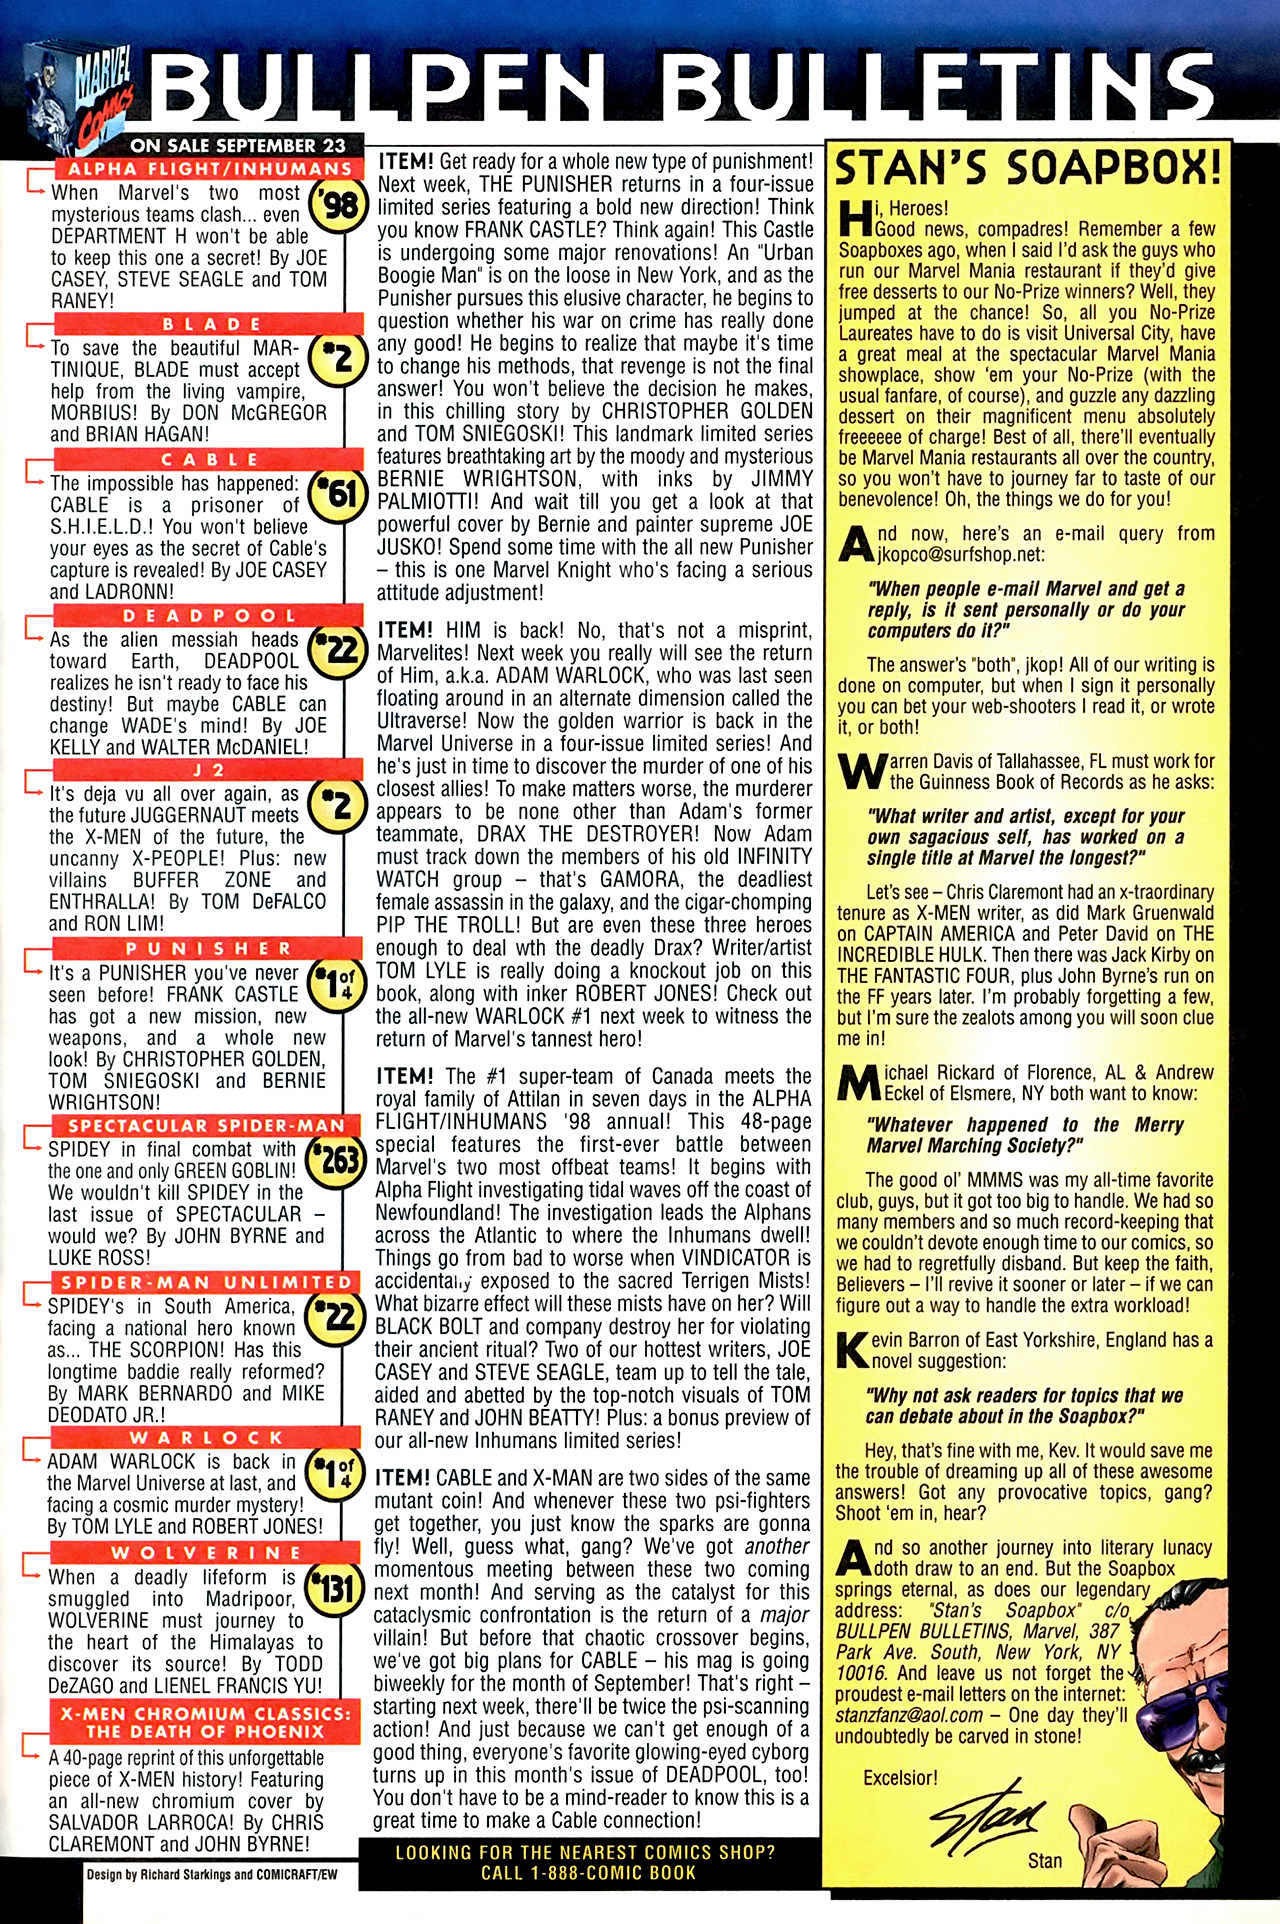 Read online Mutant X comic -  Issue #2 - 25